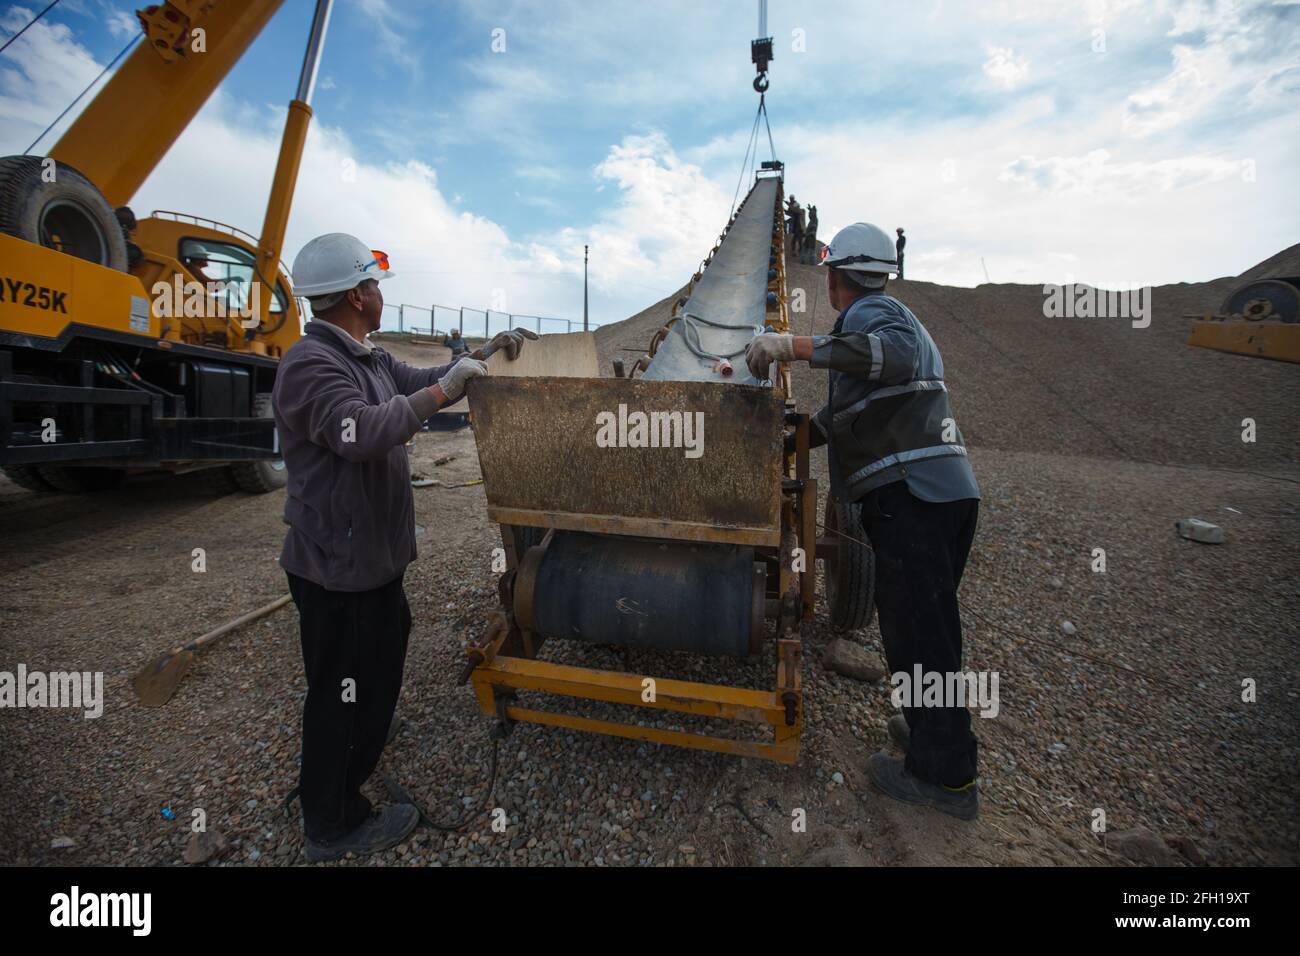 Mining and processing plant Altynalmas. Workers assembling rock crushing machine, using for gold ore shredding. Yellow mobile crane left. Stock Photo